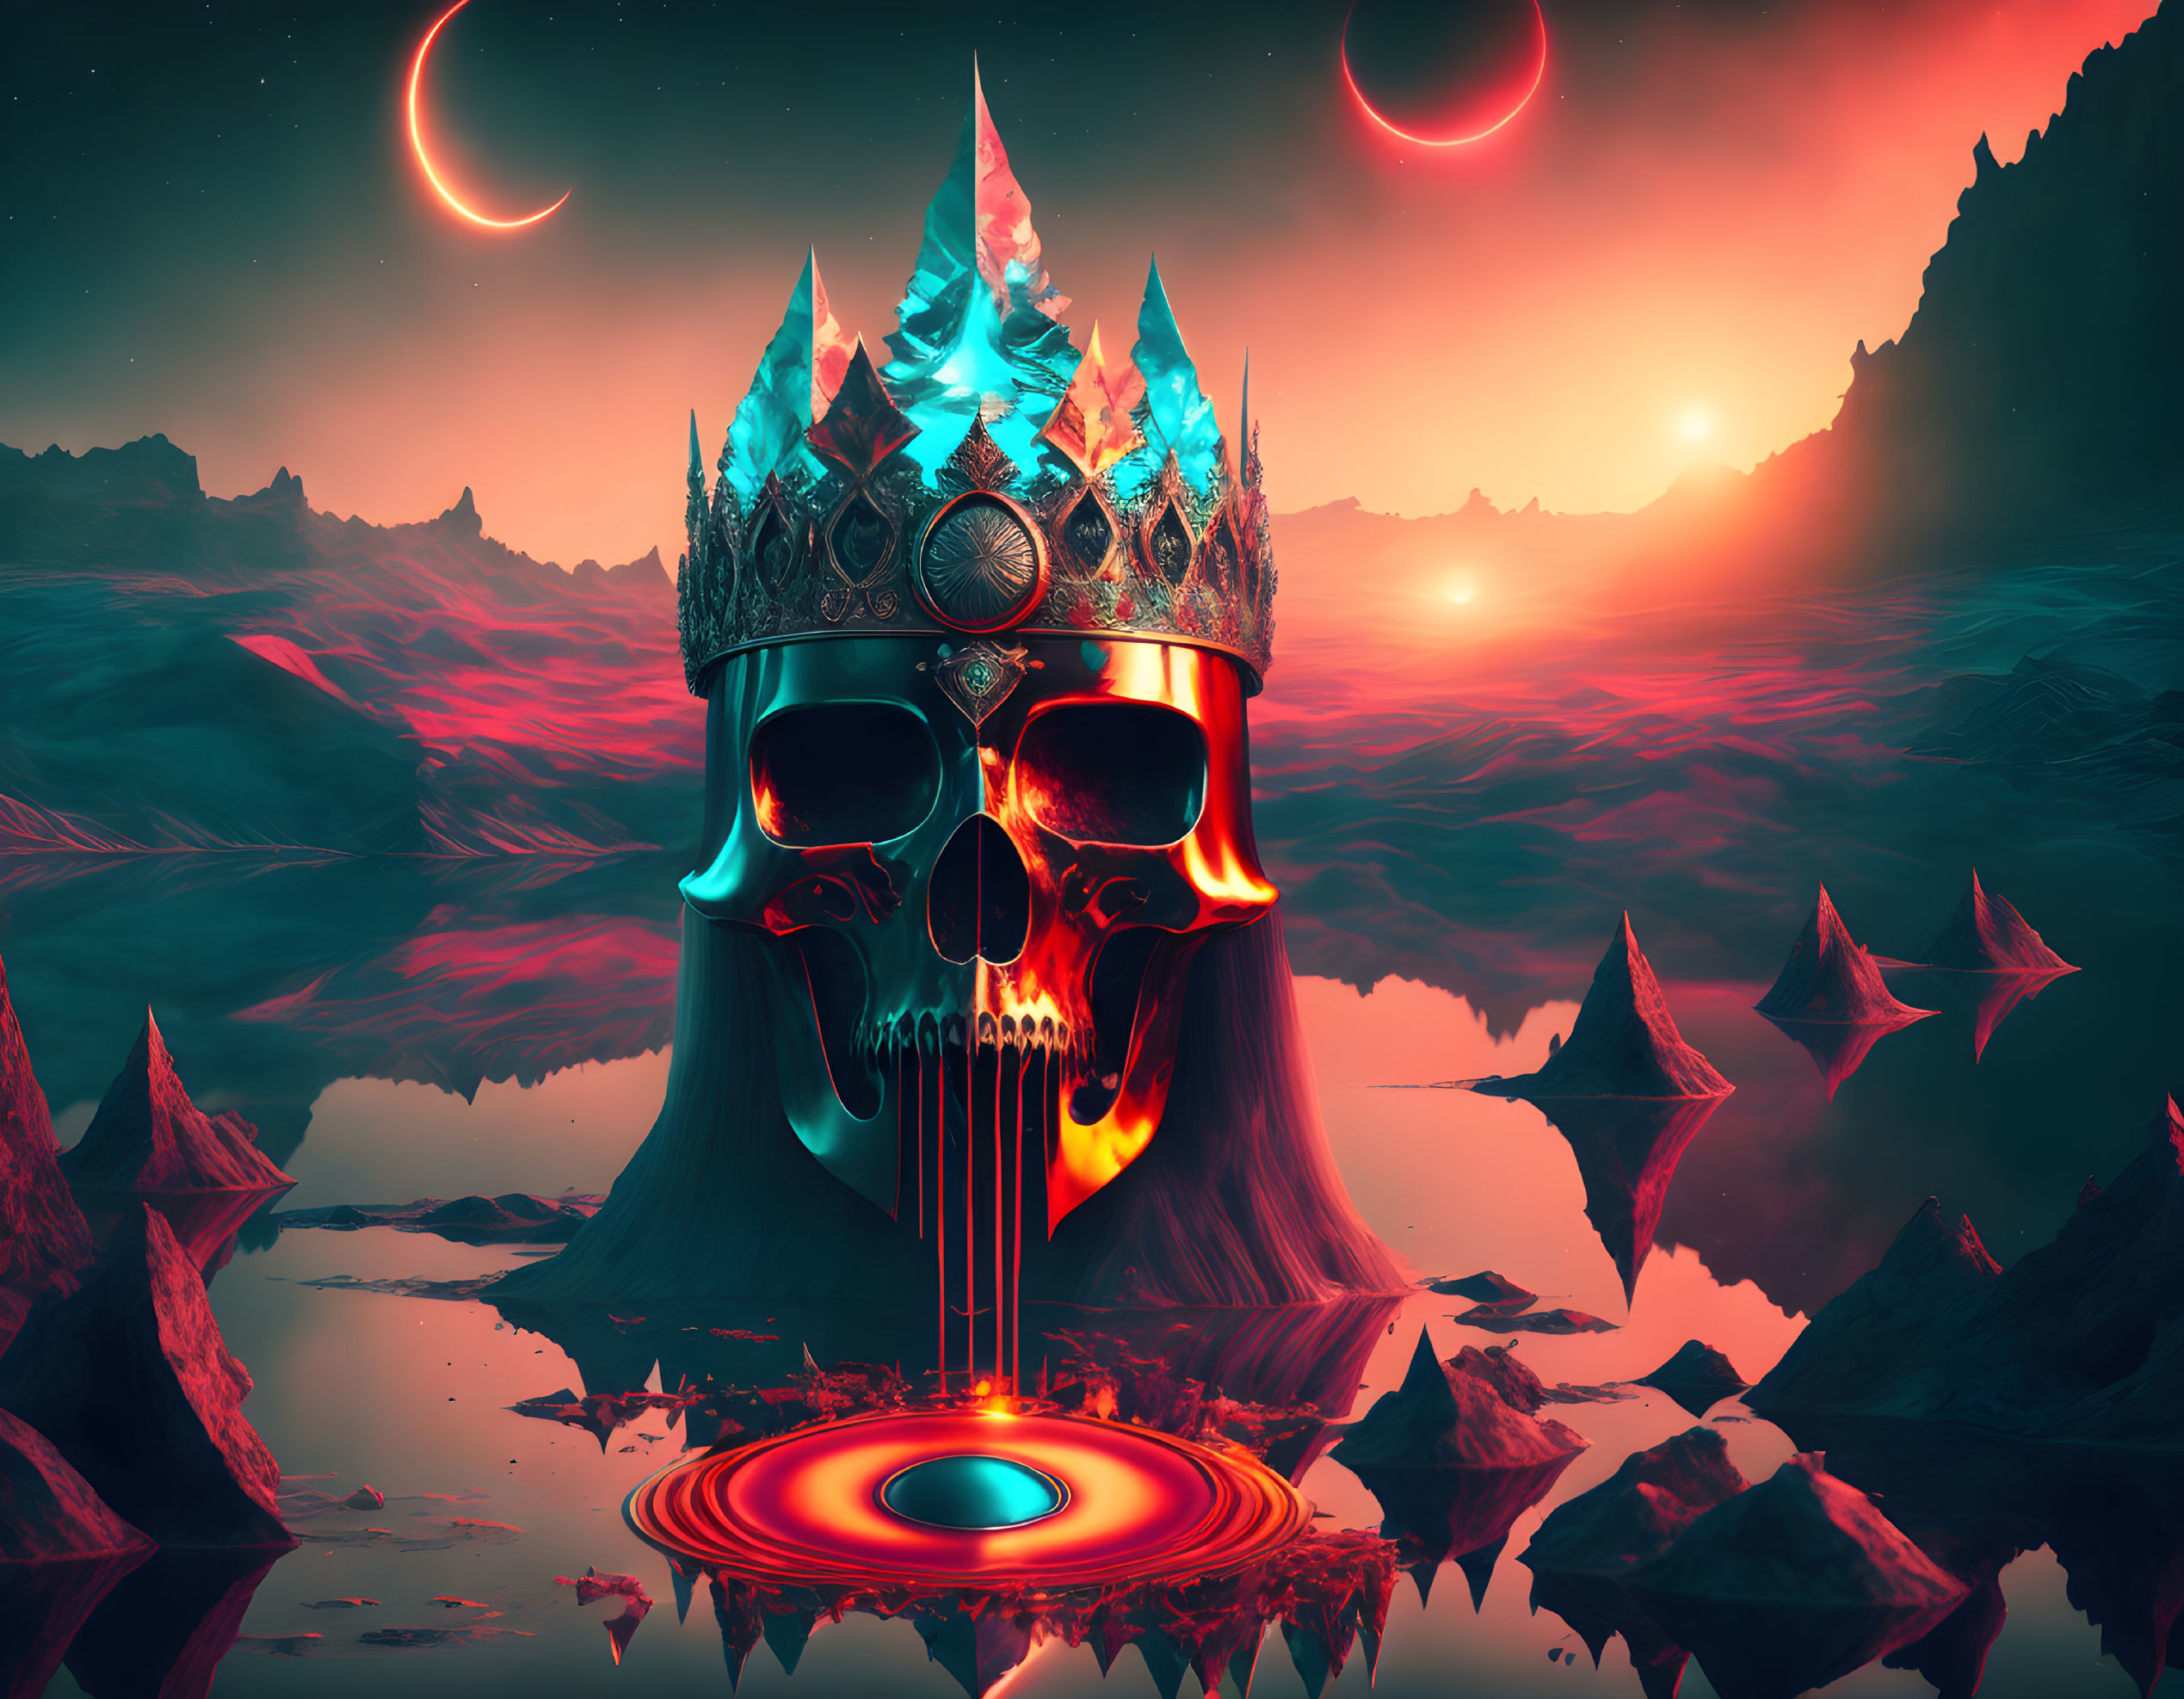 Surreal illustration: Skull with crown in reflective liquid, suns, mountains